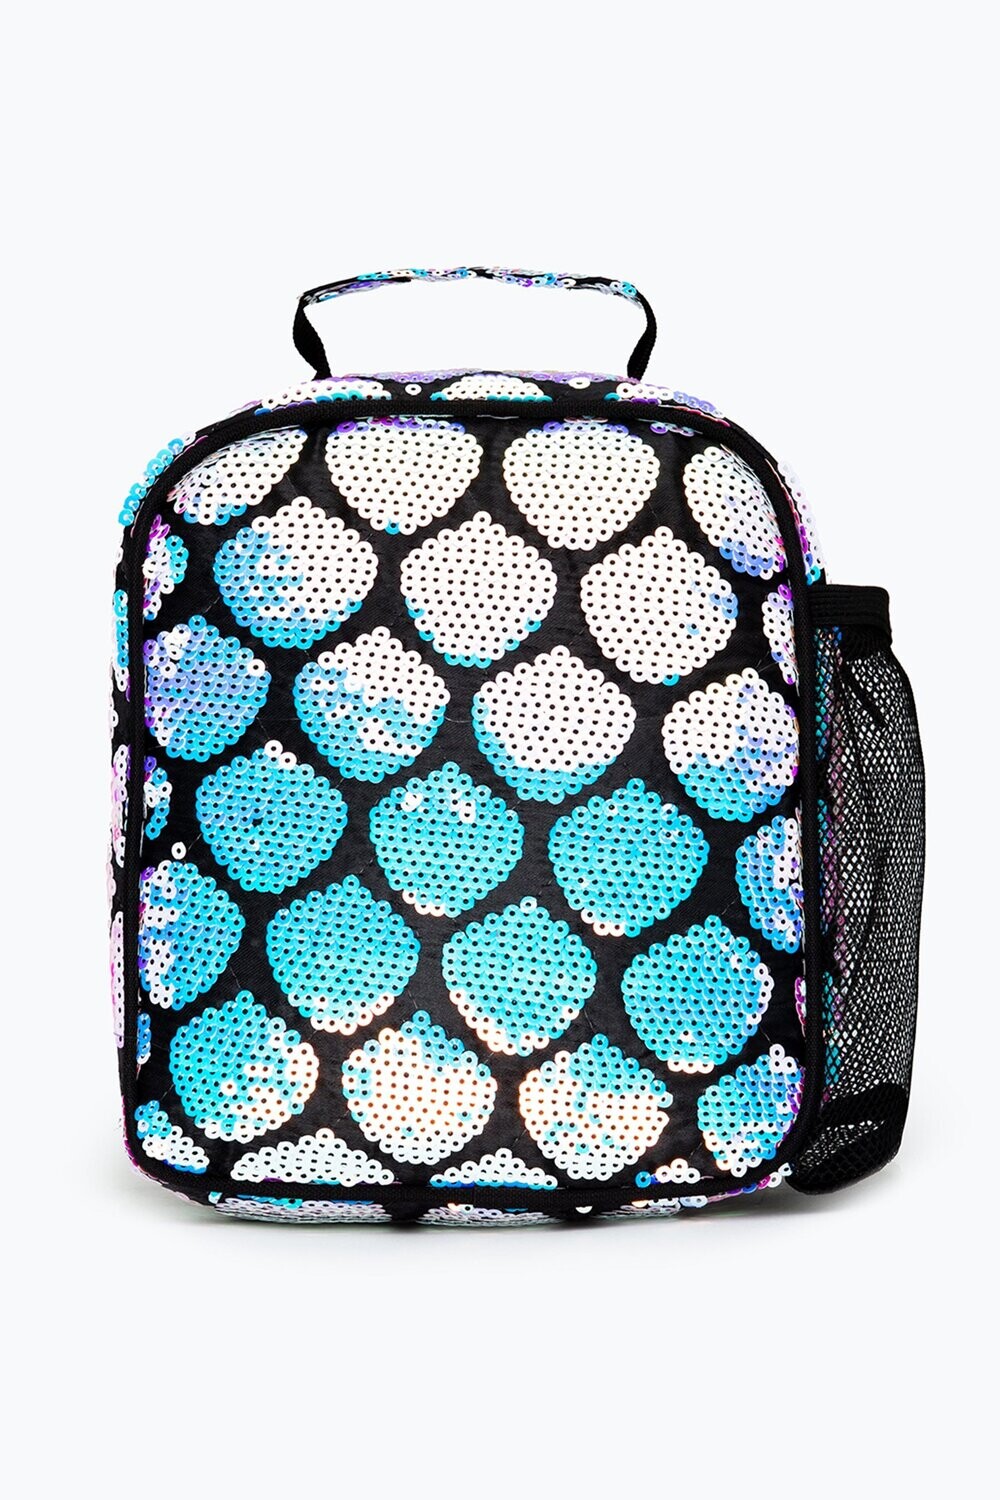 HYPE SEQUIN MERMAID LUNCH BAG - One Size / Multi